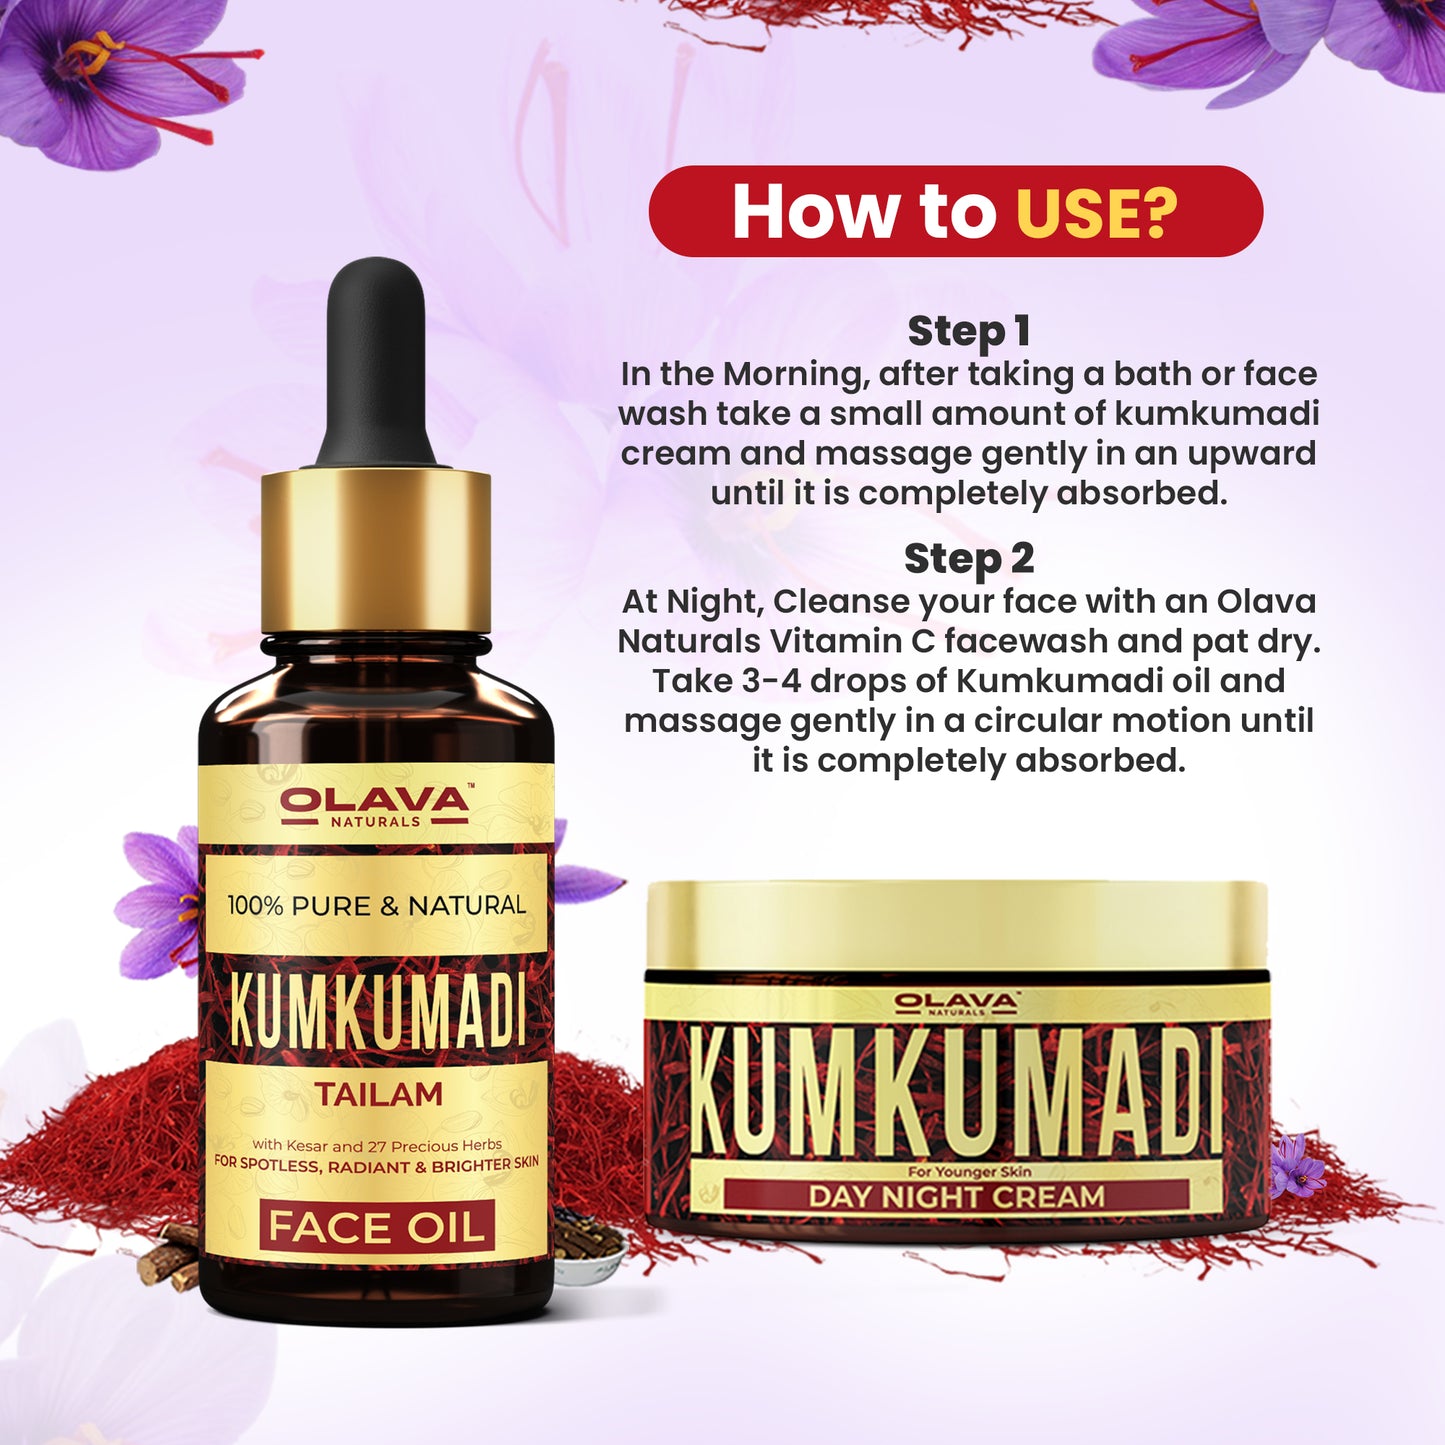 Kumkumadi Combo Pack for Brighter Skin - Best for Anti-Aging